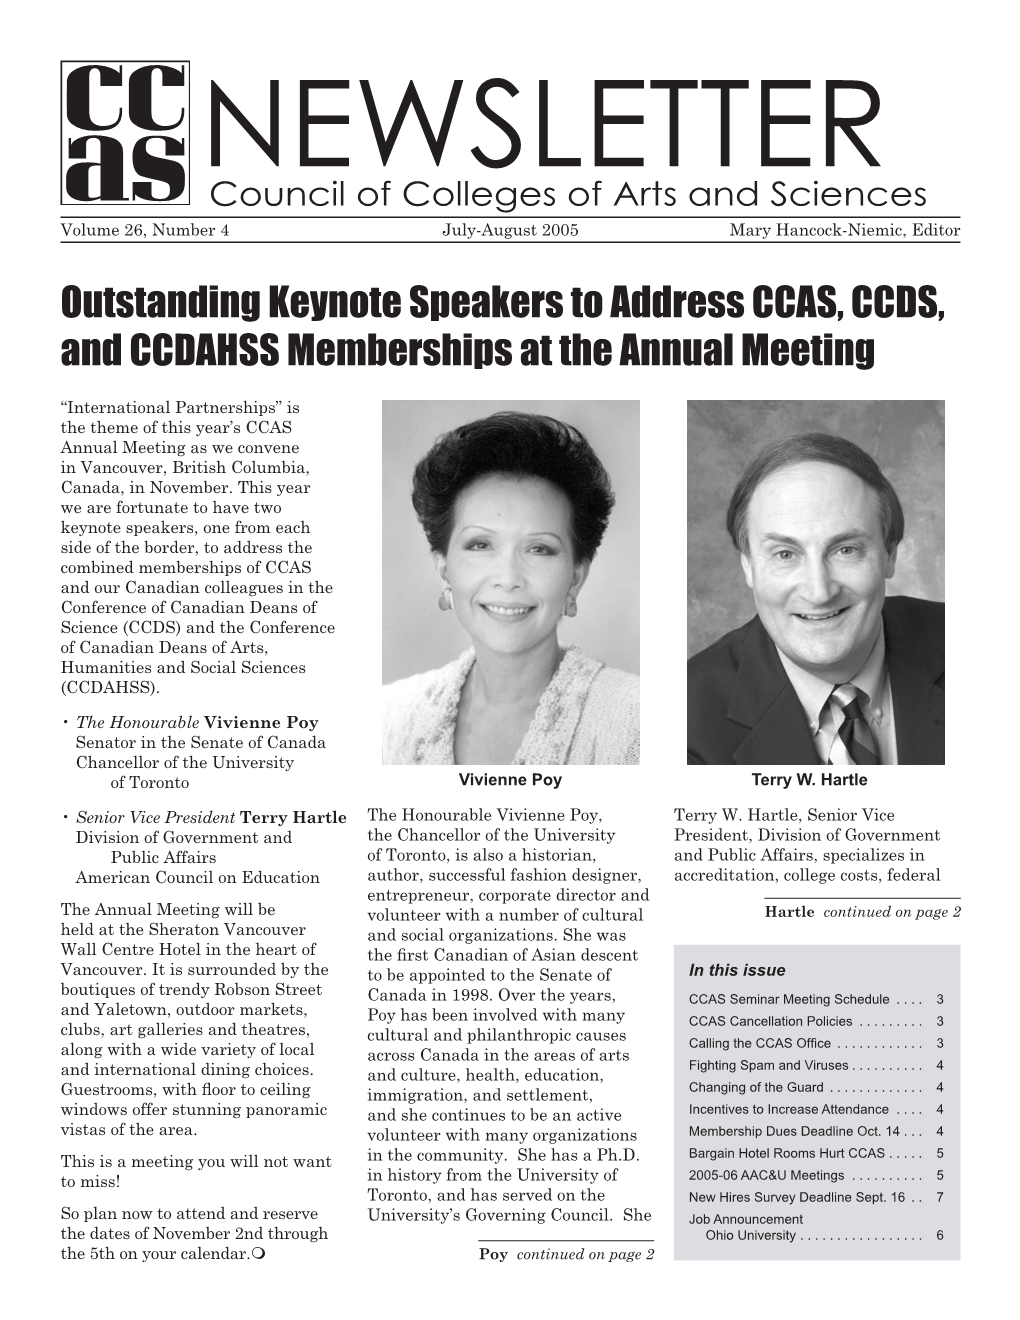 Outstanding Keynote Speakers to Address CCAS, CCDS, and CCDAHSS Memberships at the Annual Meeting